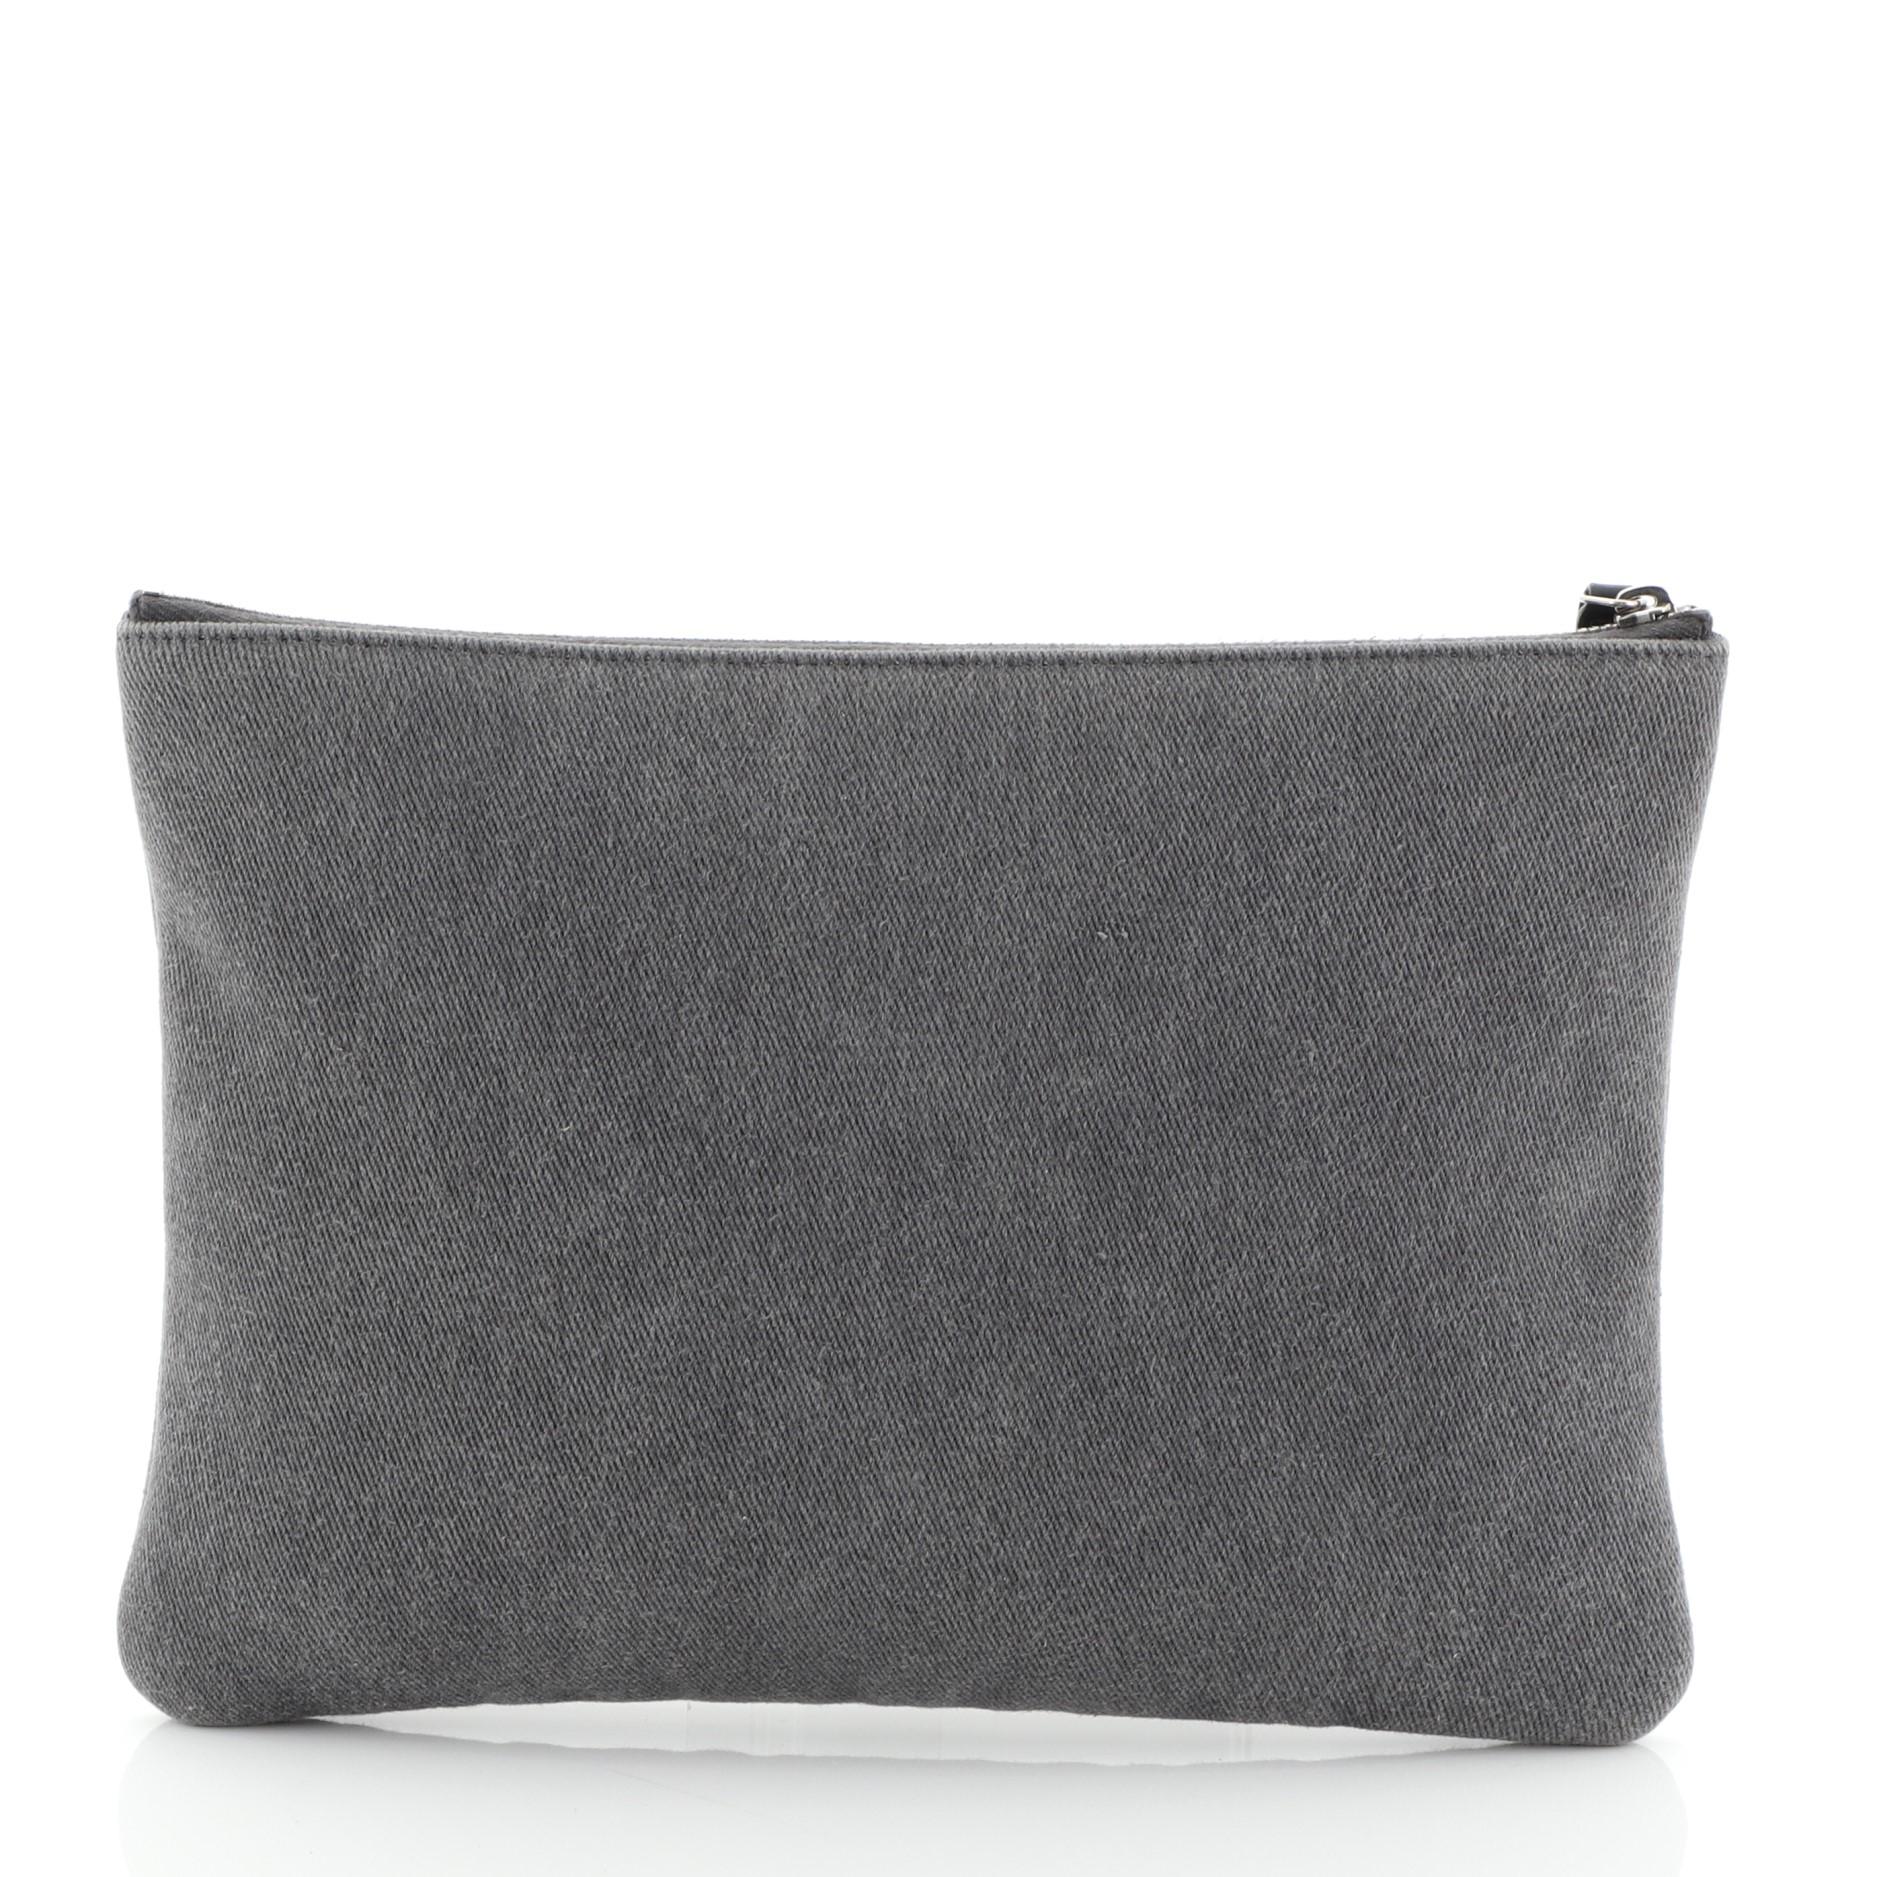 Gray Chanel Deauville Pouch Denim with Sequins Medium